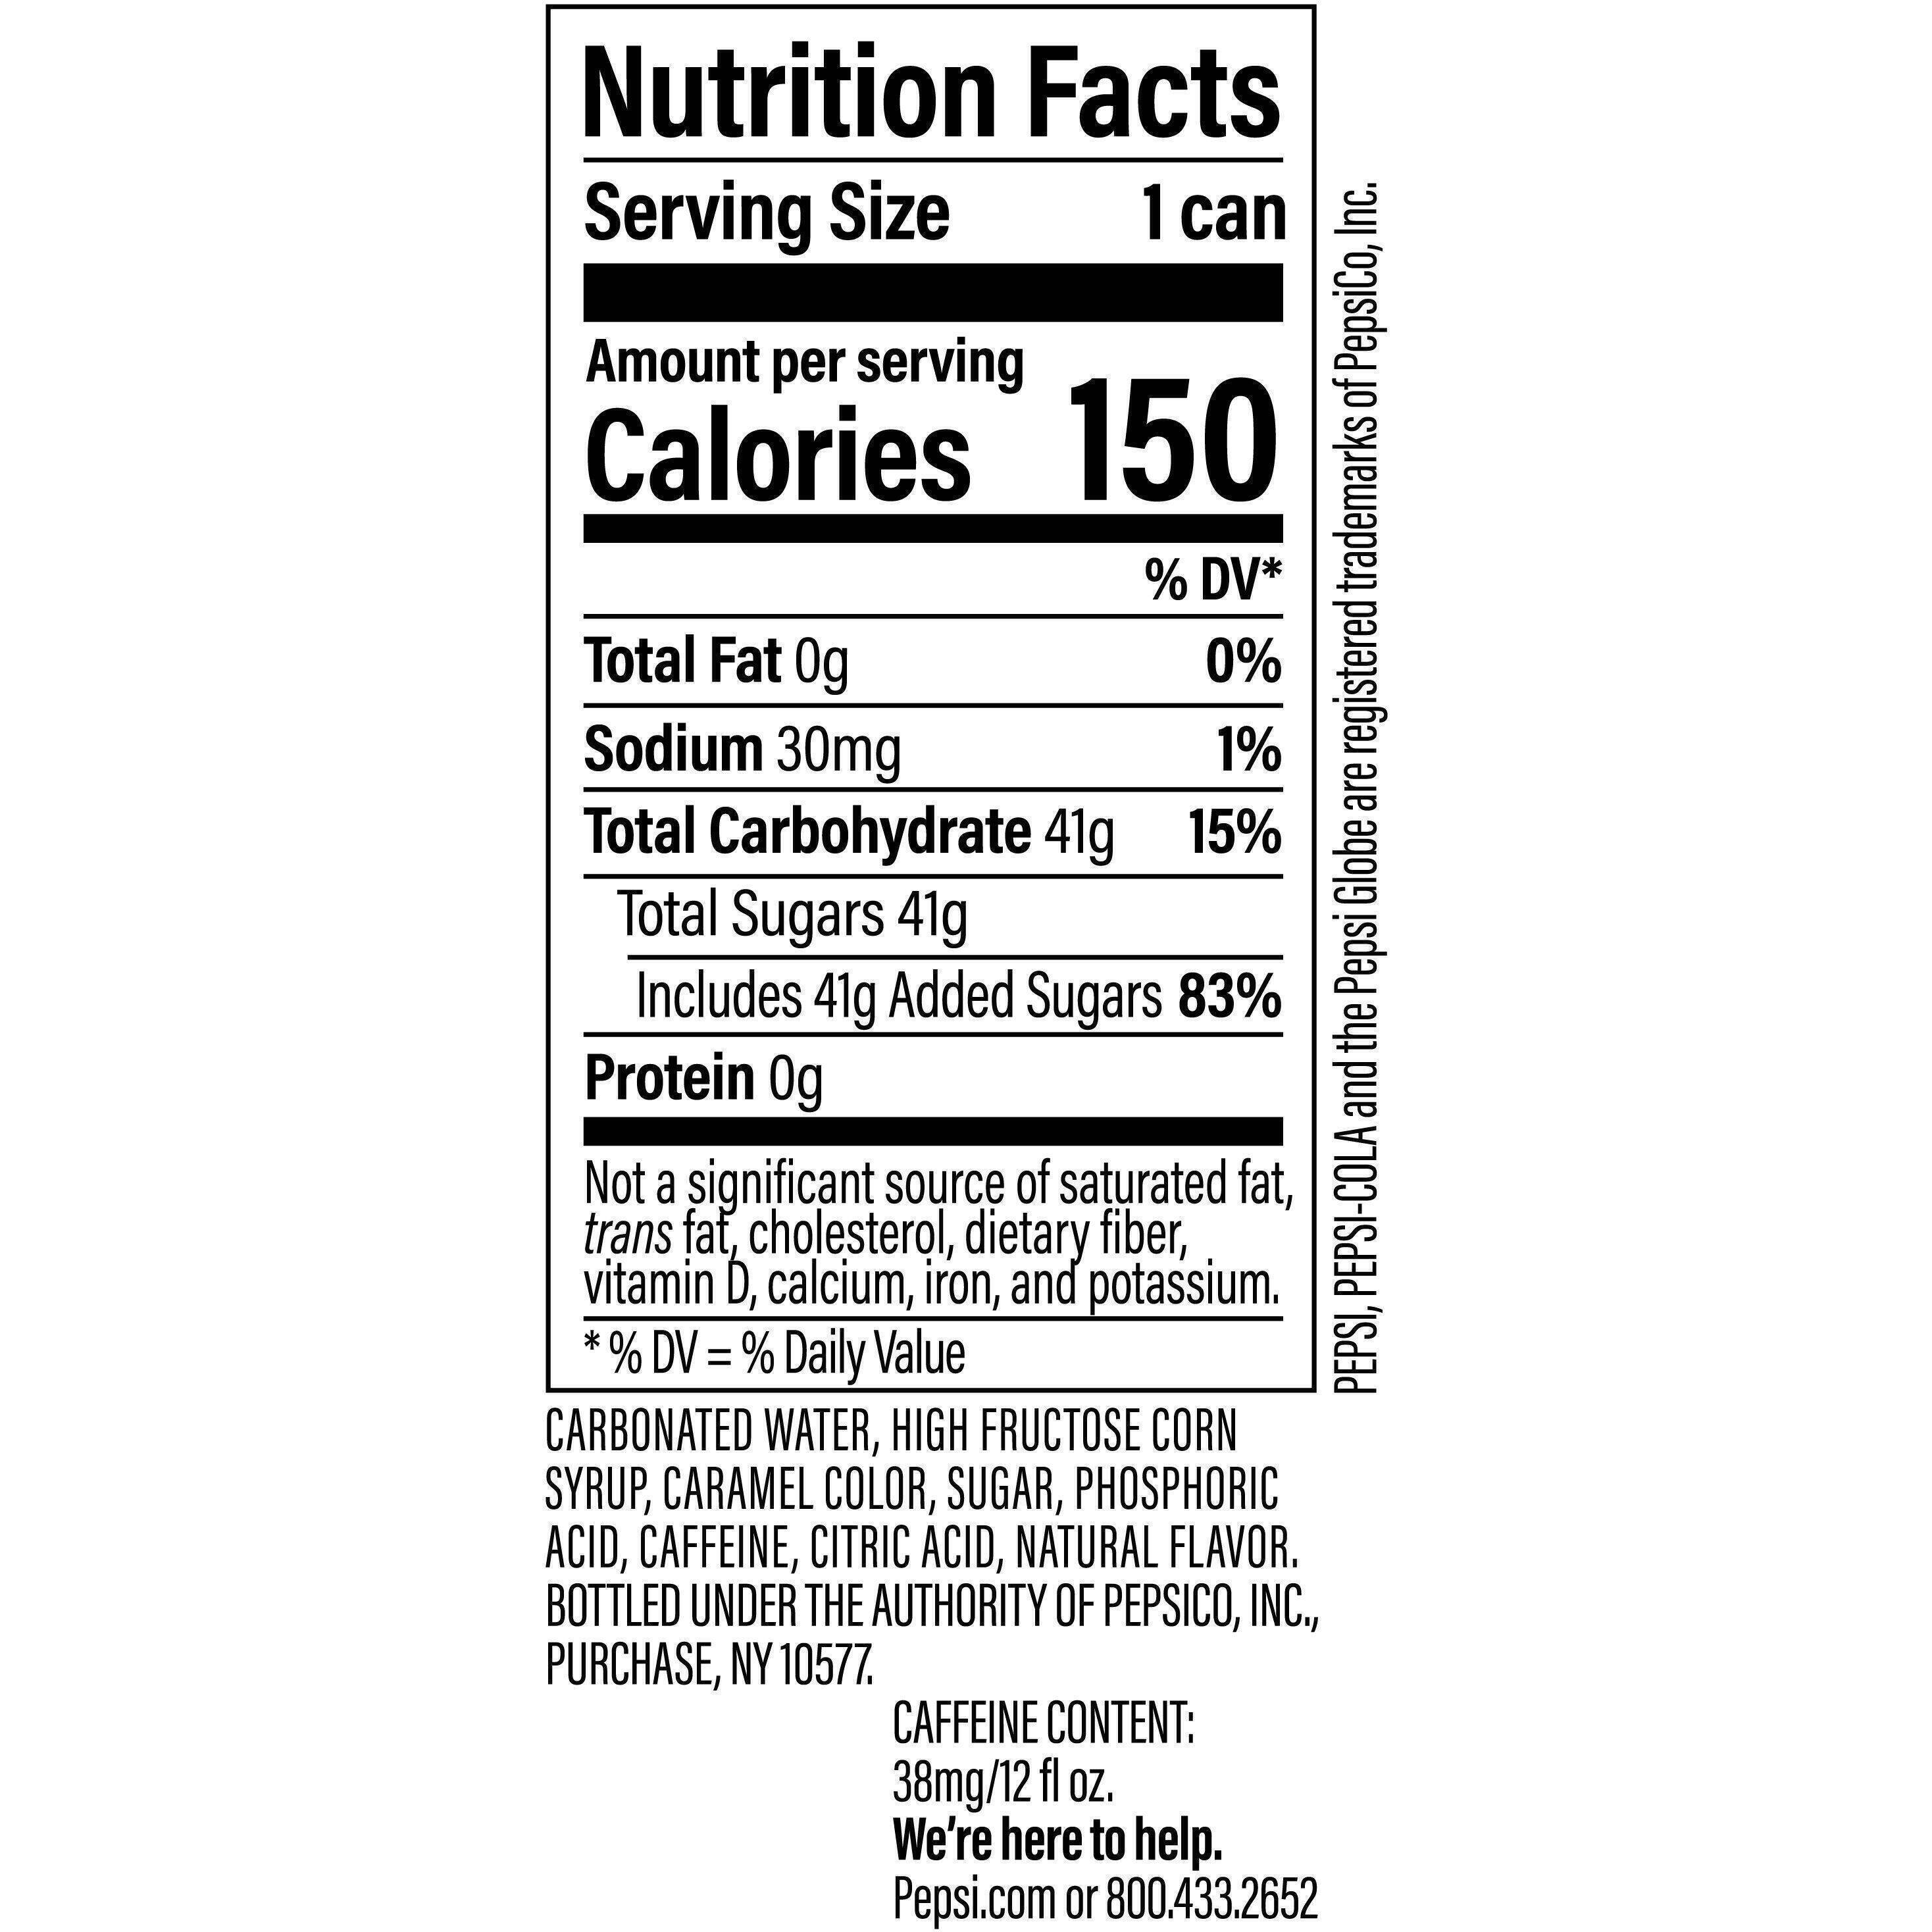 Image describing nutrition information for product Pepsi